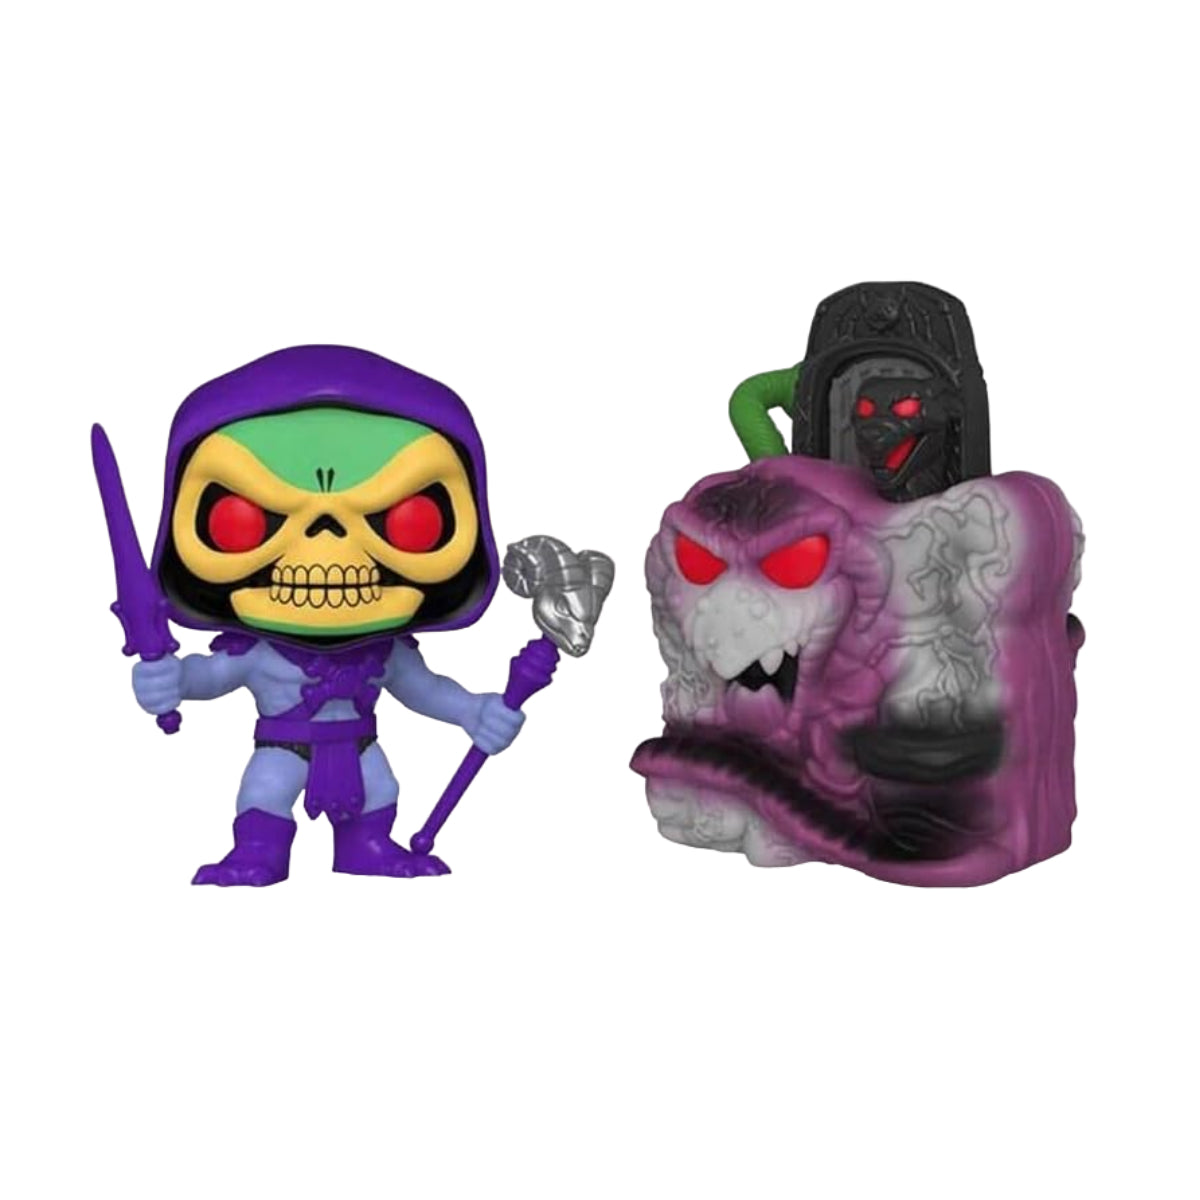 FUNKO POP TOWN MASTER OF THE UNIVERSE SKELETOR WITH SNAKE MOUNTAIN 23